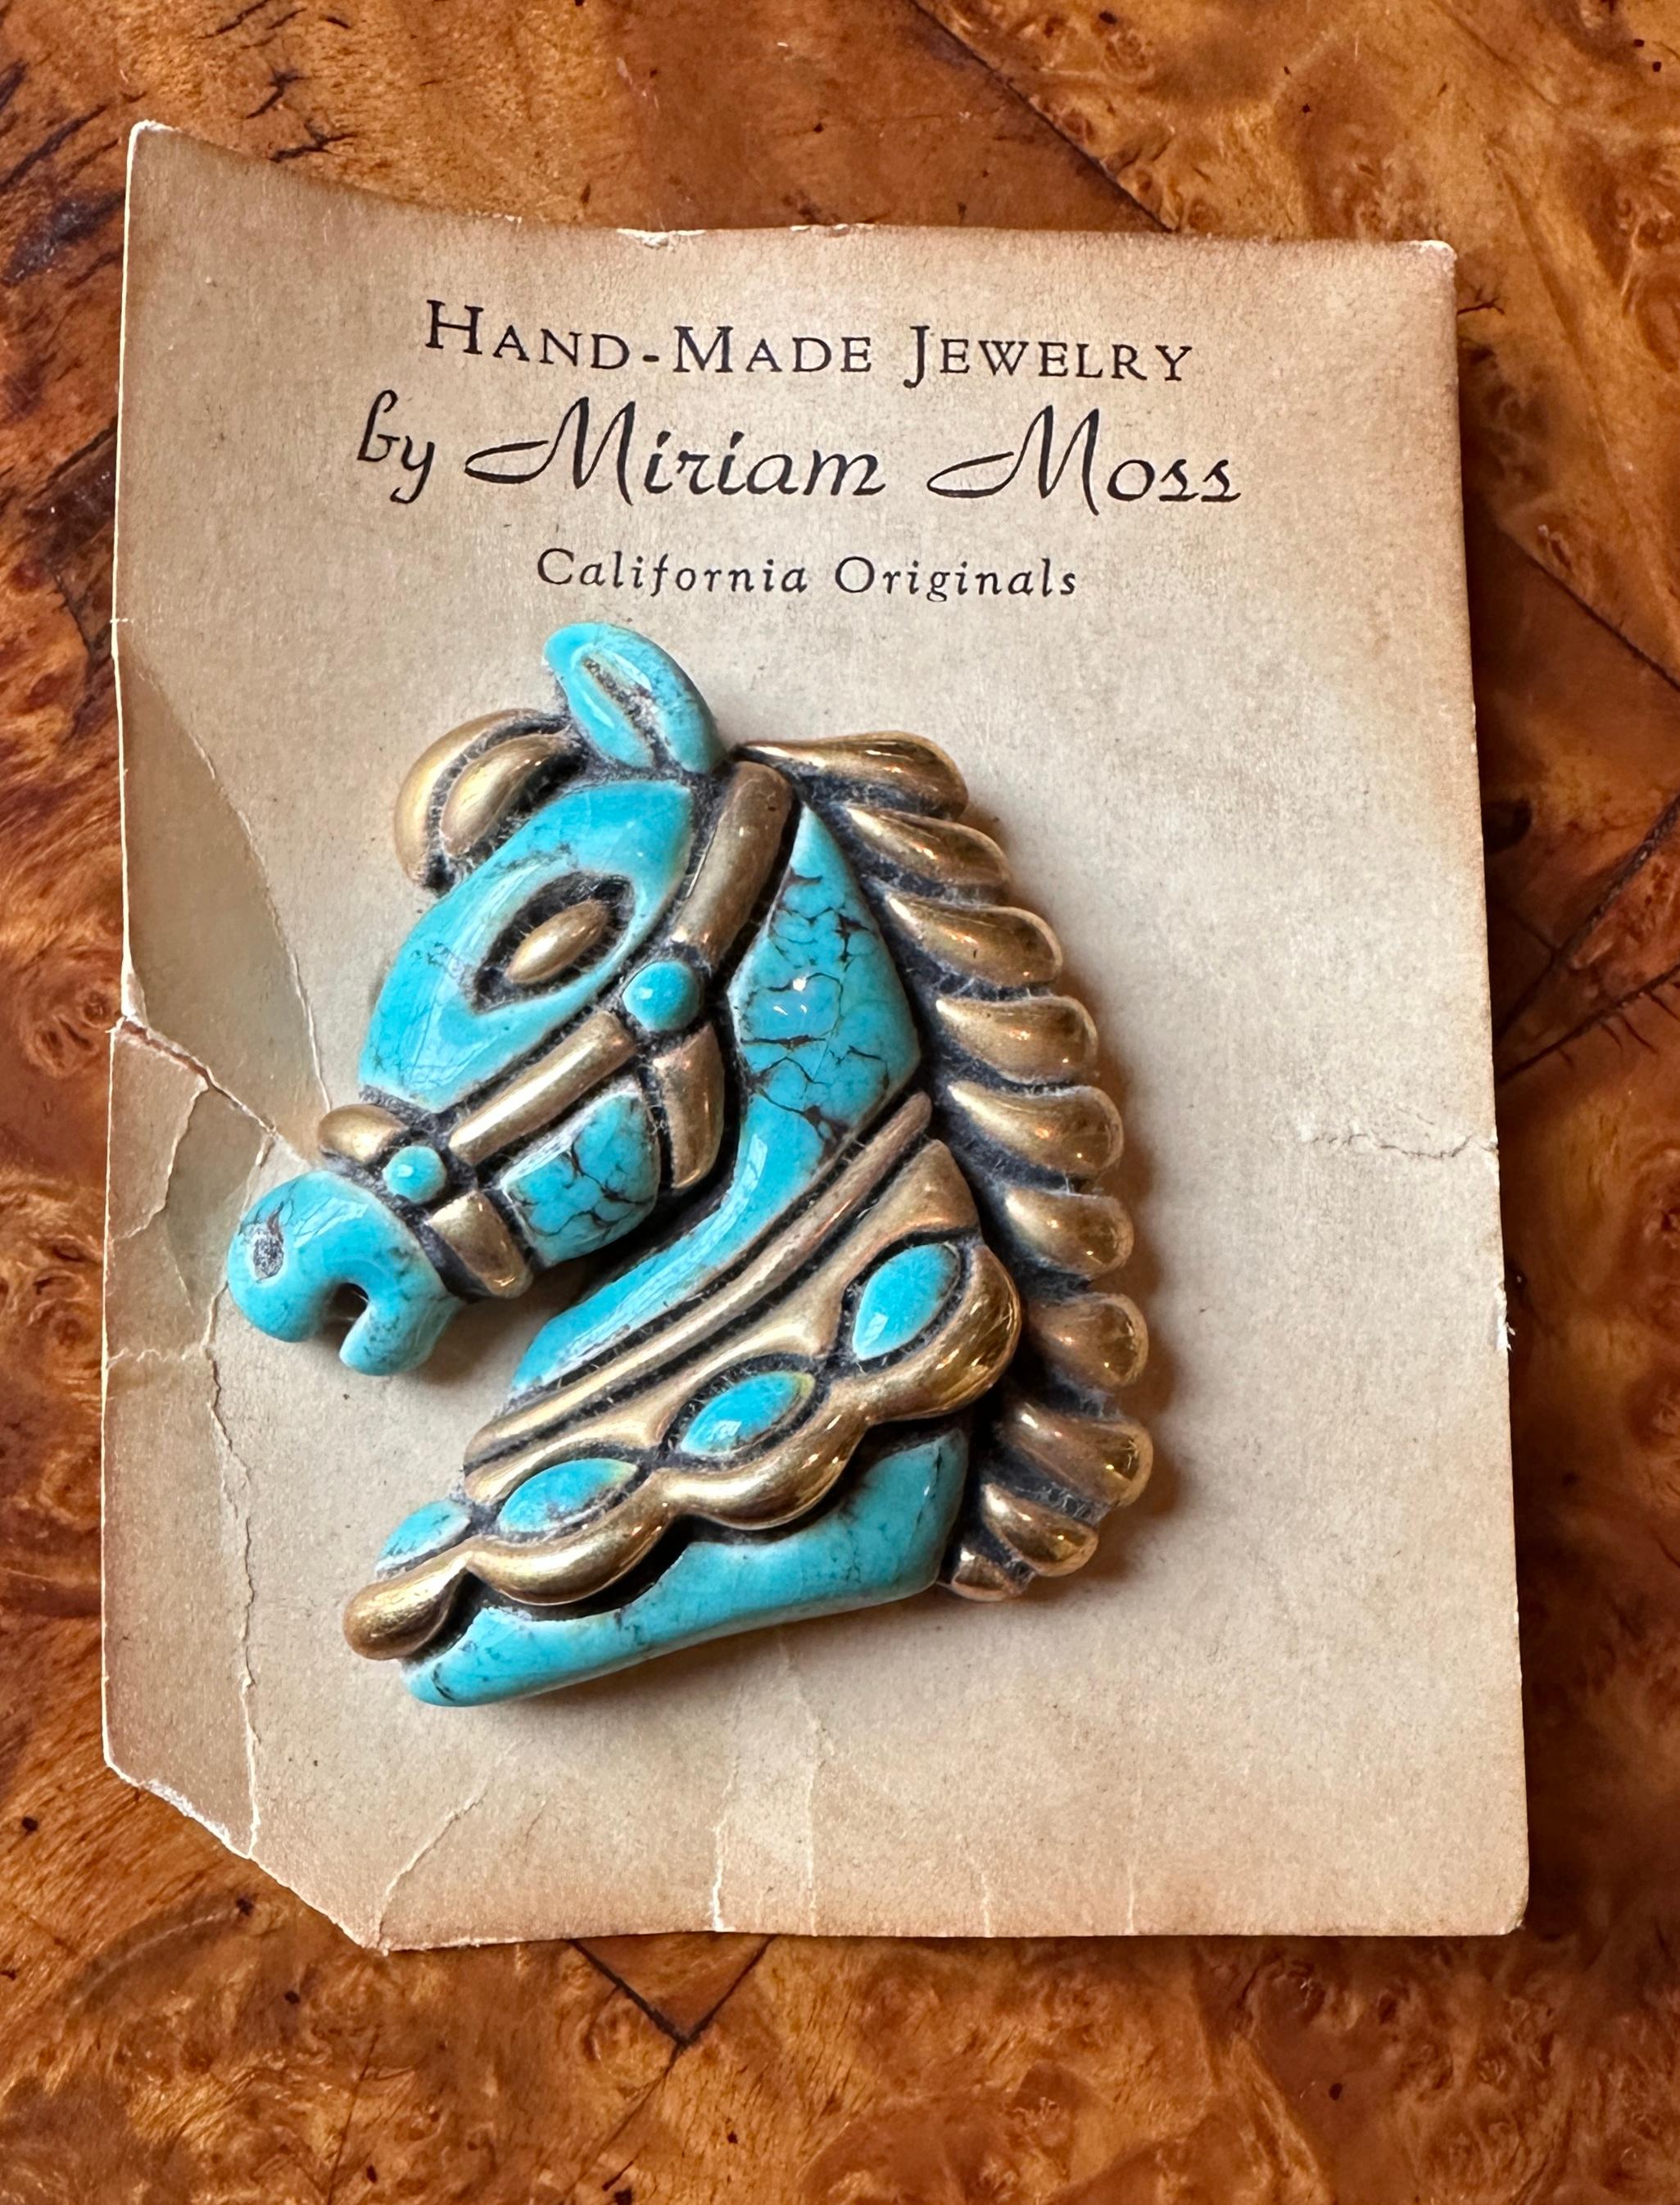 THIS IS A WONDERFUL RETRO MID-CENTURY MODERN ART POTTERY BROOCH BY THE CALIFORNIA MID-CENTURY ARTIST MIRIAM MOSS OF A WONDERFUL HORSE HEAD WITH FABULOUS TURQUOISE BLUE AND GOLD GLAZE.  MIRIAM MOSS' CALIFORNIA  ART POTTERY, JEWELRY, SCULPTURE AND ART